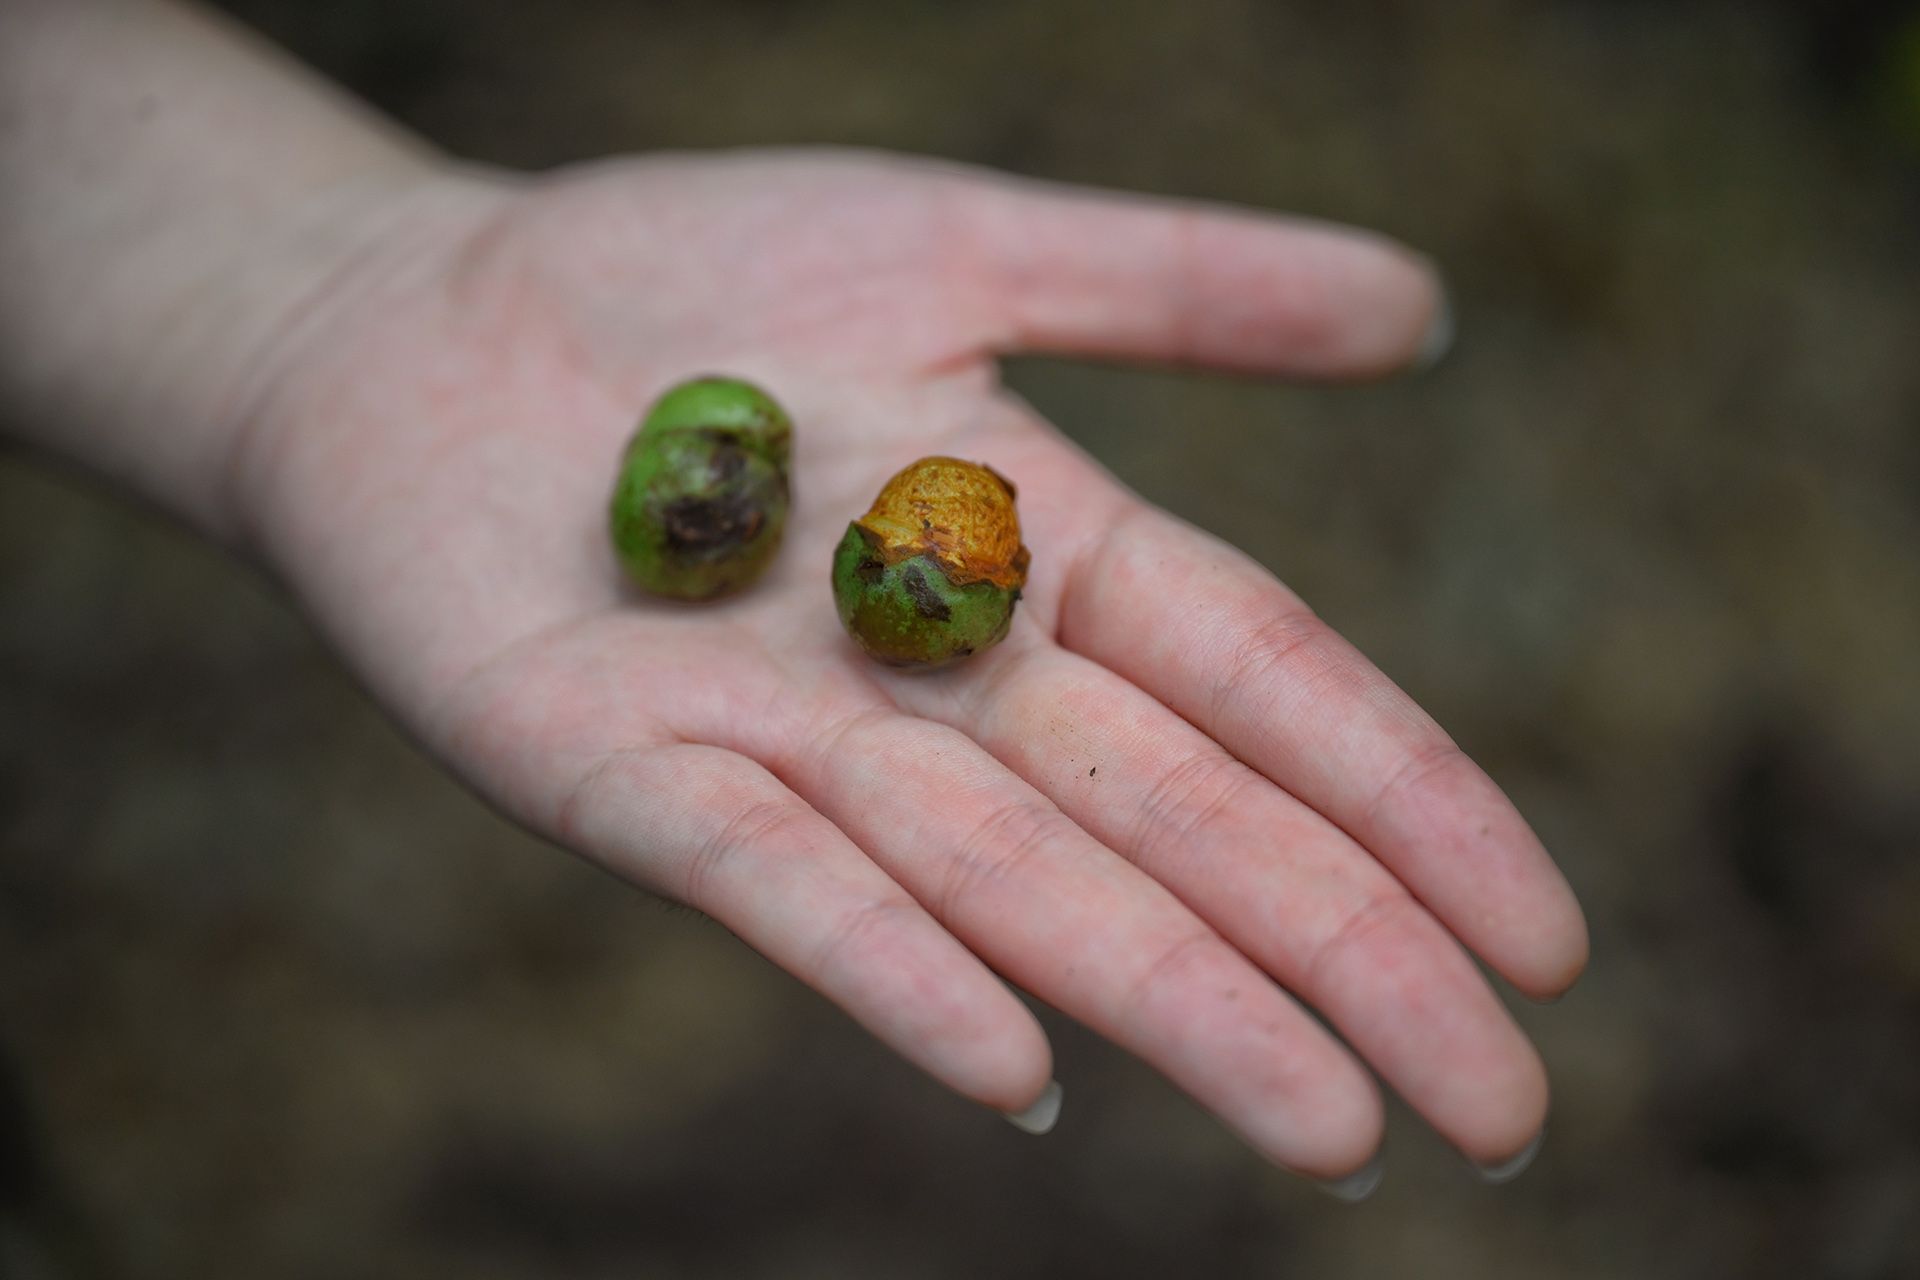 Fallen fruits from a Prunus polystachya tree in the Central Catchment Nature Reserve. From prior studies, researchers know these fruits are consumed likely by larger animals, such as long-tailed macaques.